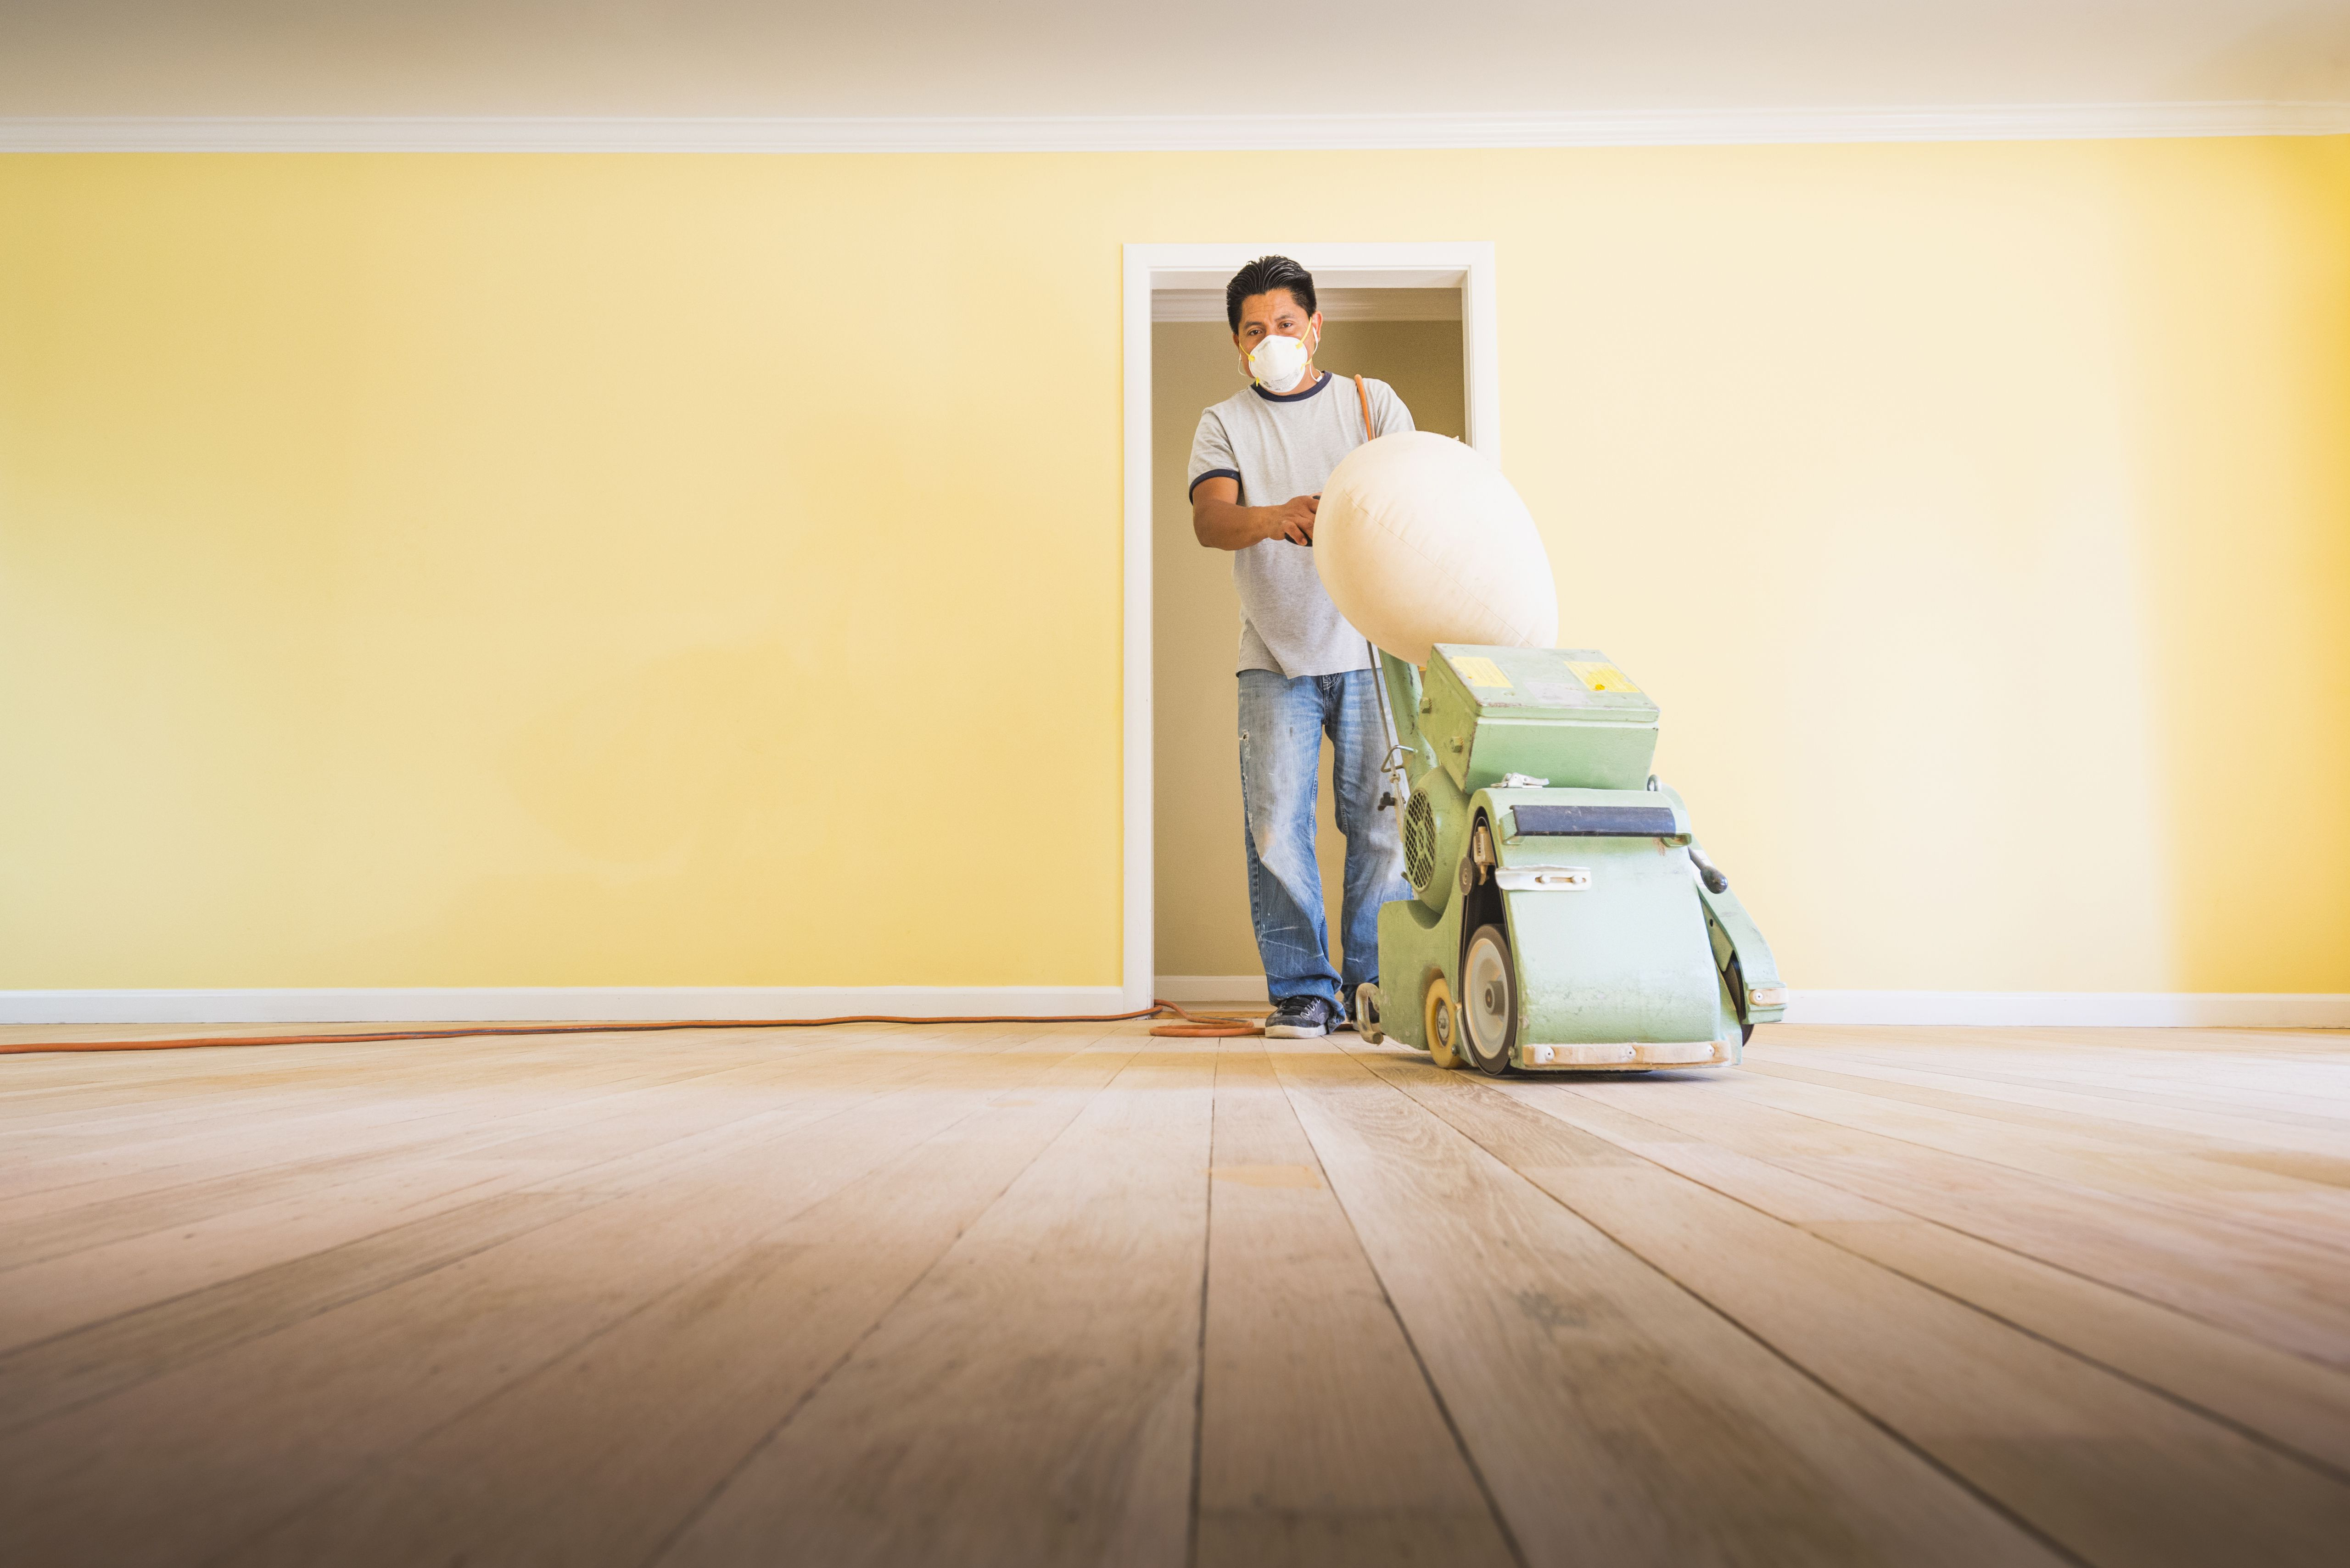 26 Perfect Hardwood Floor Refinishing Vs Replacing 2024 free download hardwood floor refinishing vs replacing of should you paint walls or refinish floors first within floorsandingafterpainting 5a8f08dfae9ab80037d9d878